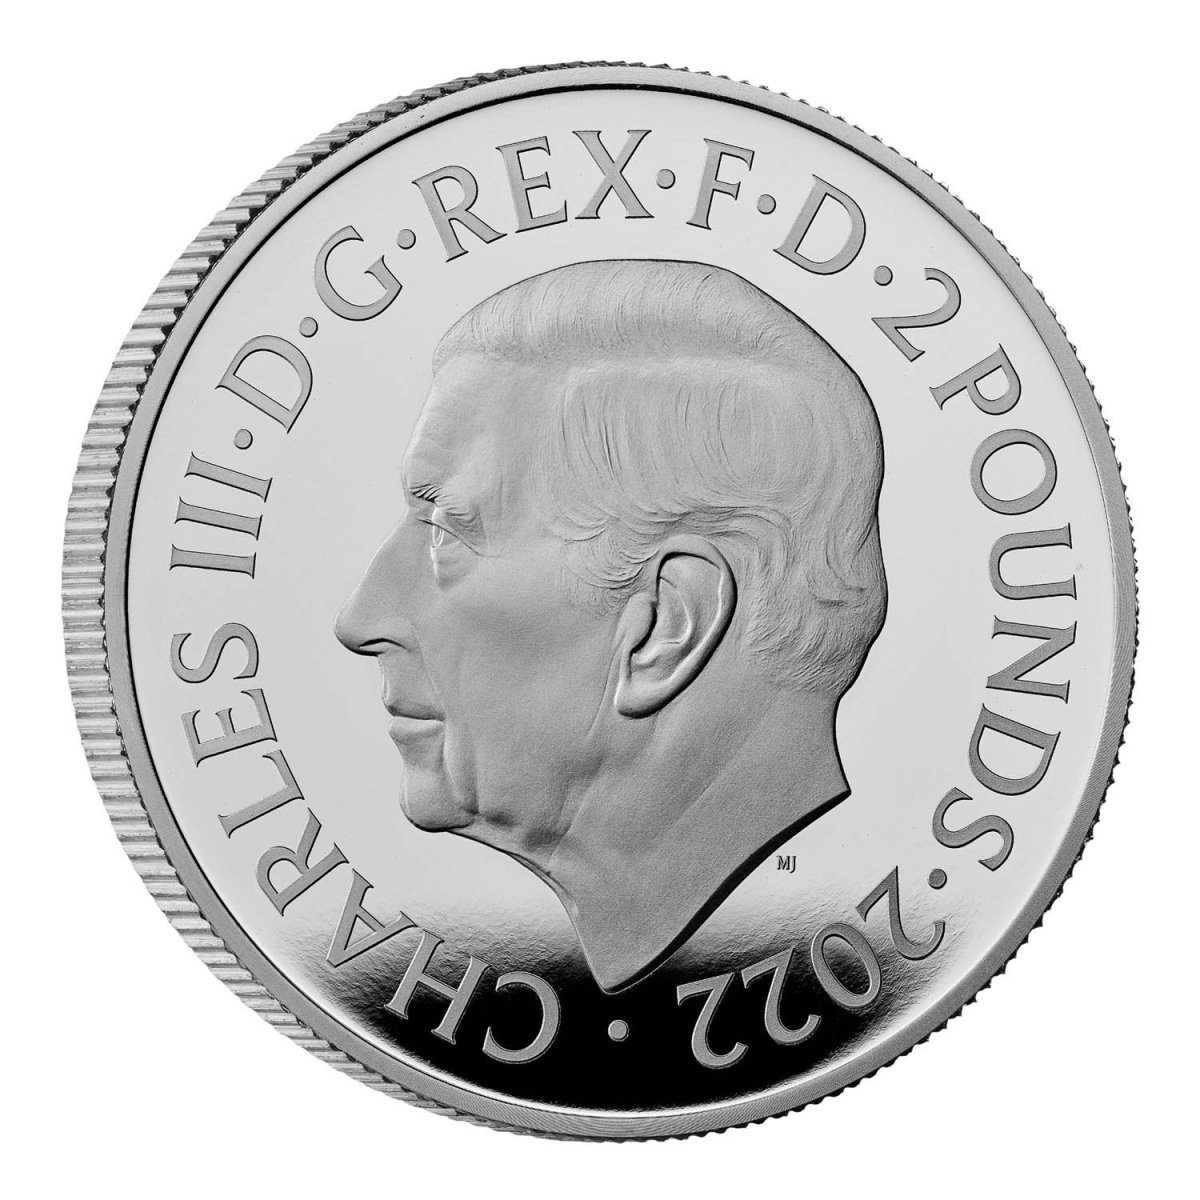 The new official effigy of King Charles III is being featured for the first time on the obverse of the coins in the new collection honoring the late Queen Elizabeth. (All images courtesy of the Royal Mint).